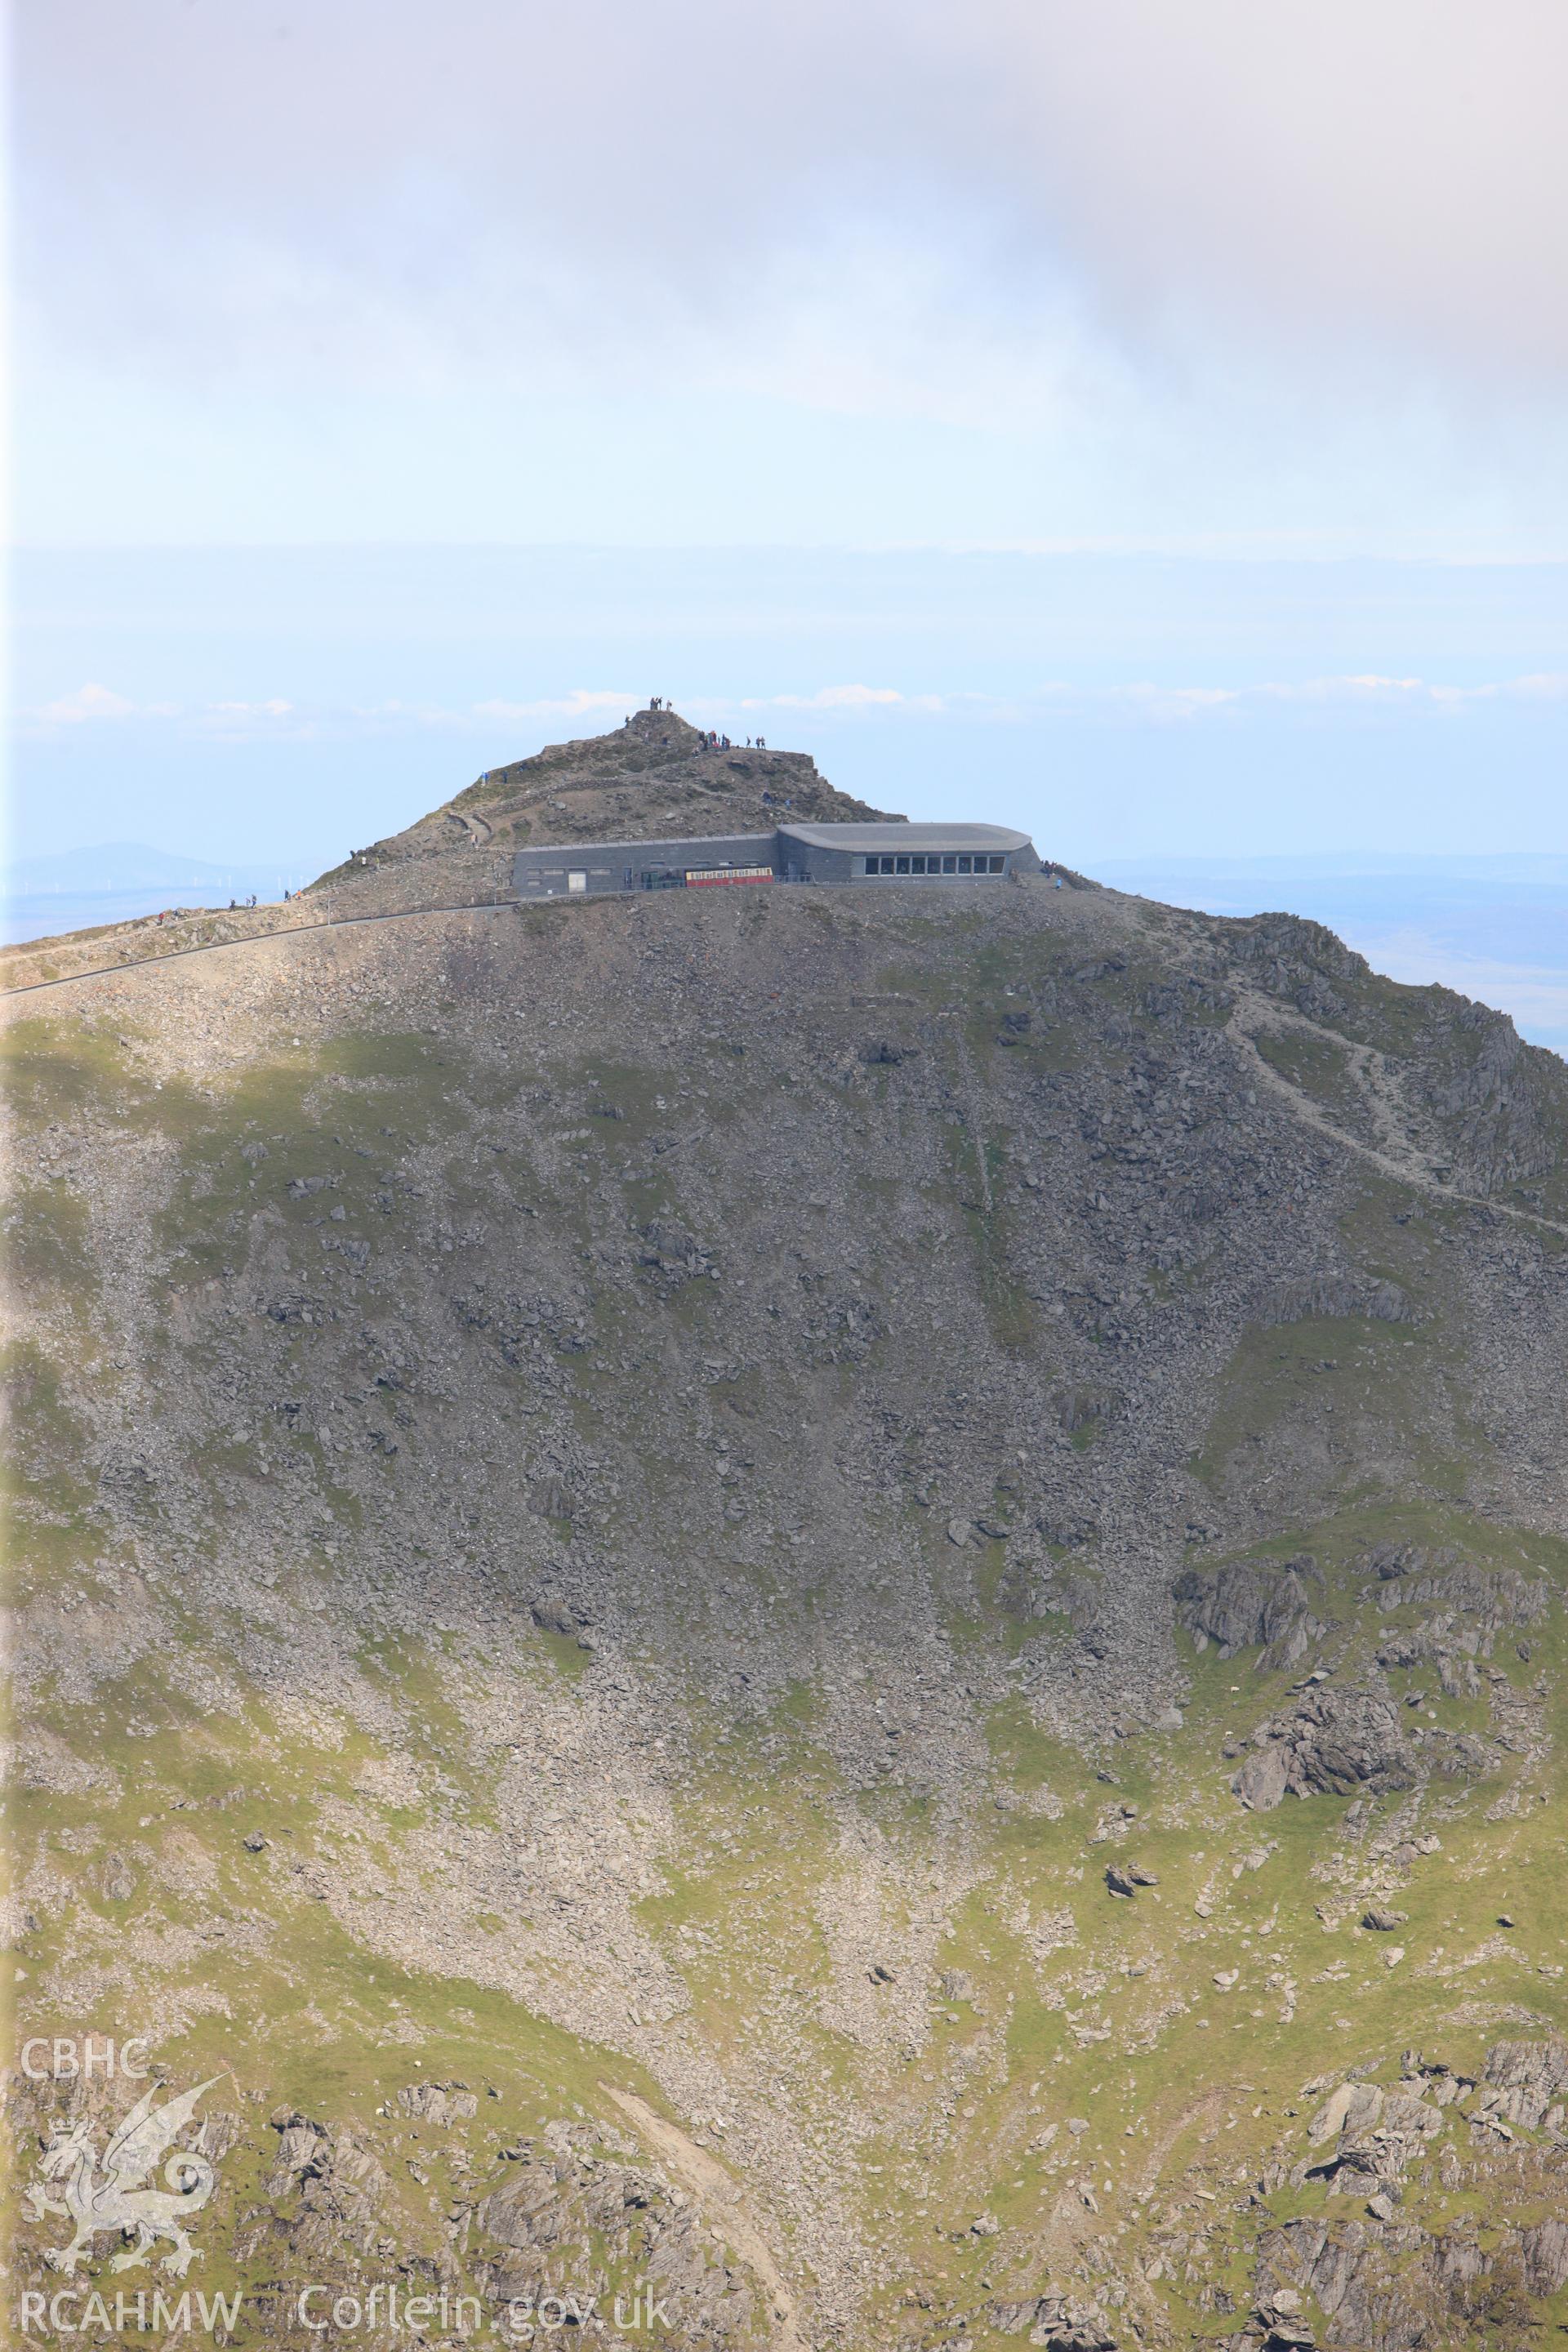 RCAHMW colour oblique photograph of Snowdon Summit Station. Taken by Toby Driver on 20/07/2011.